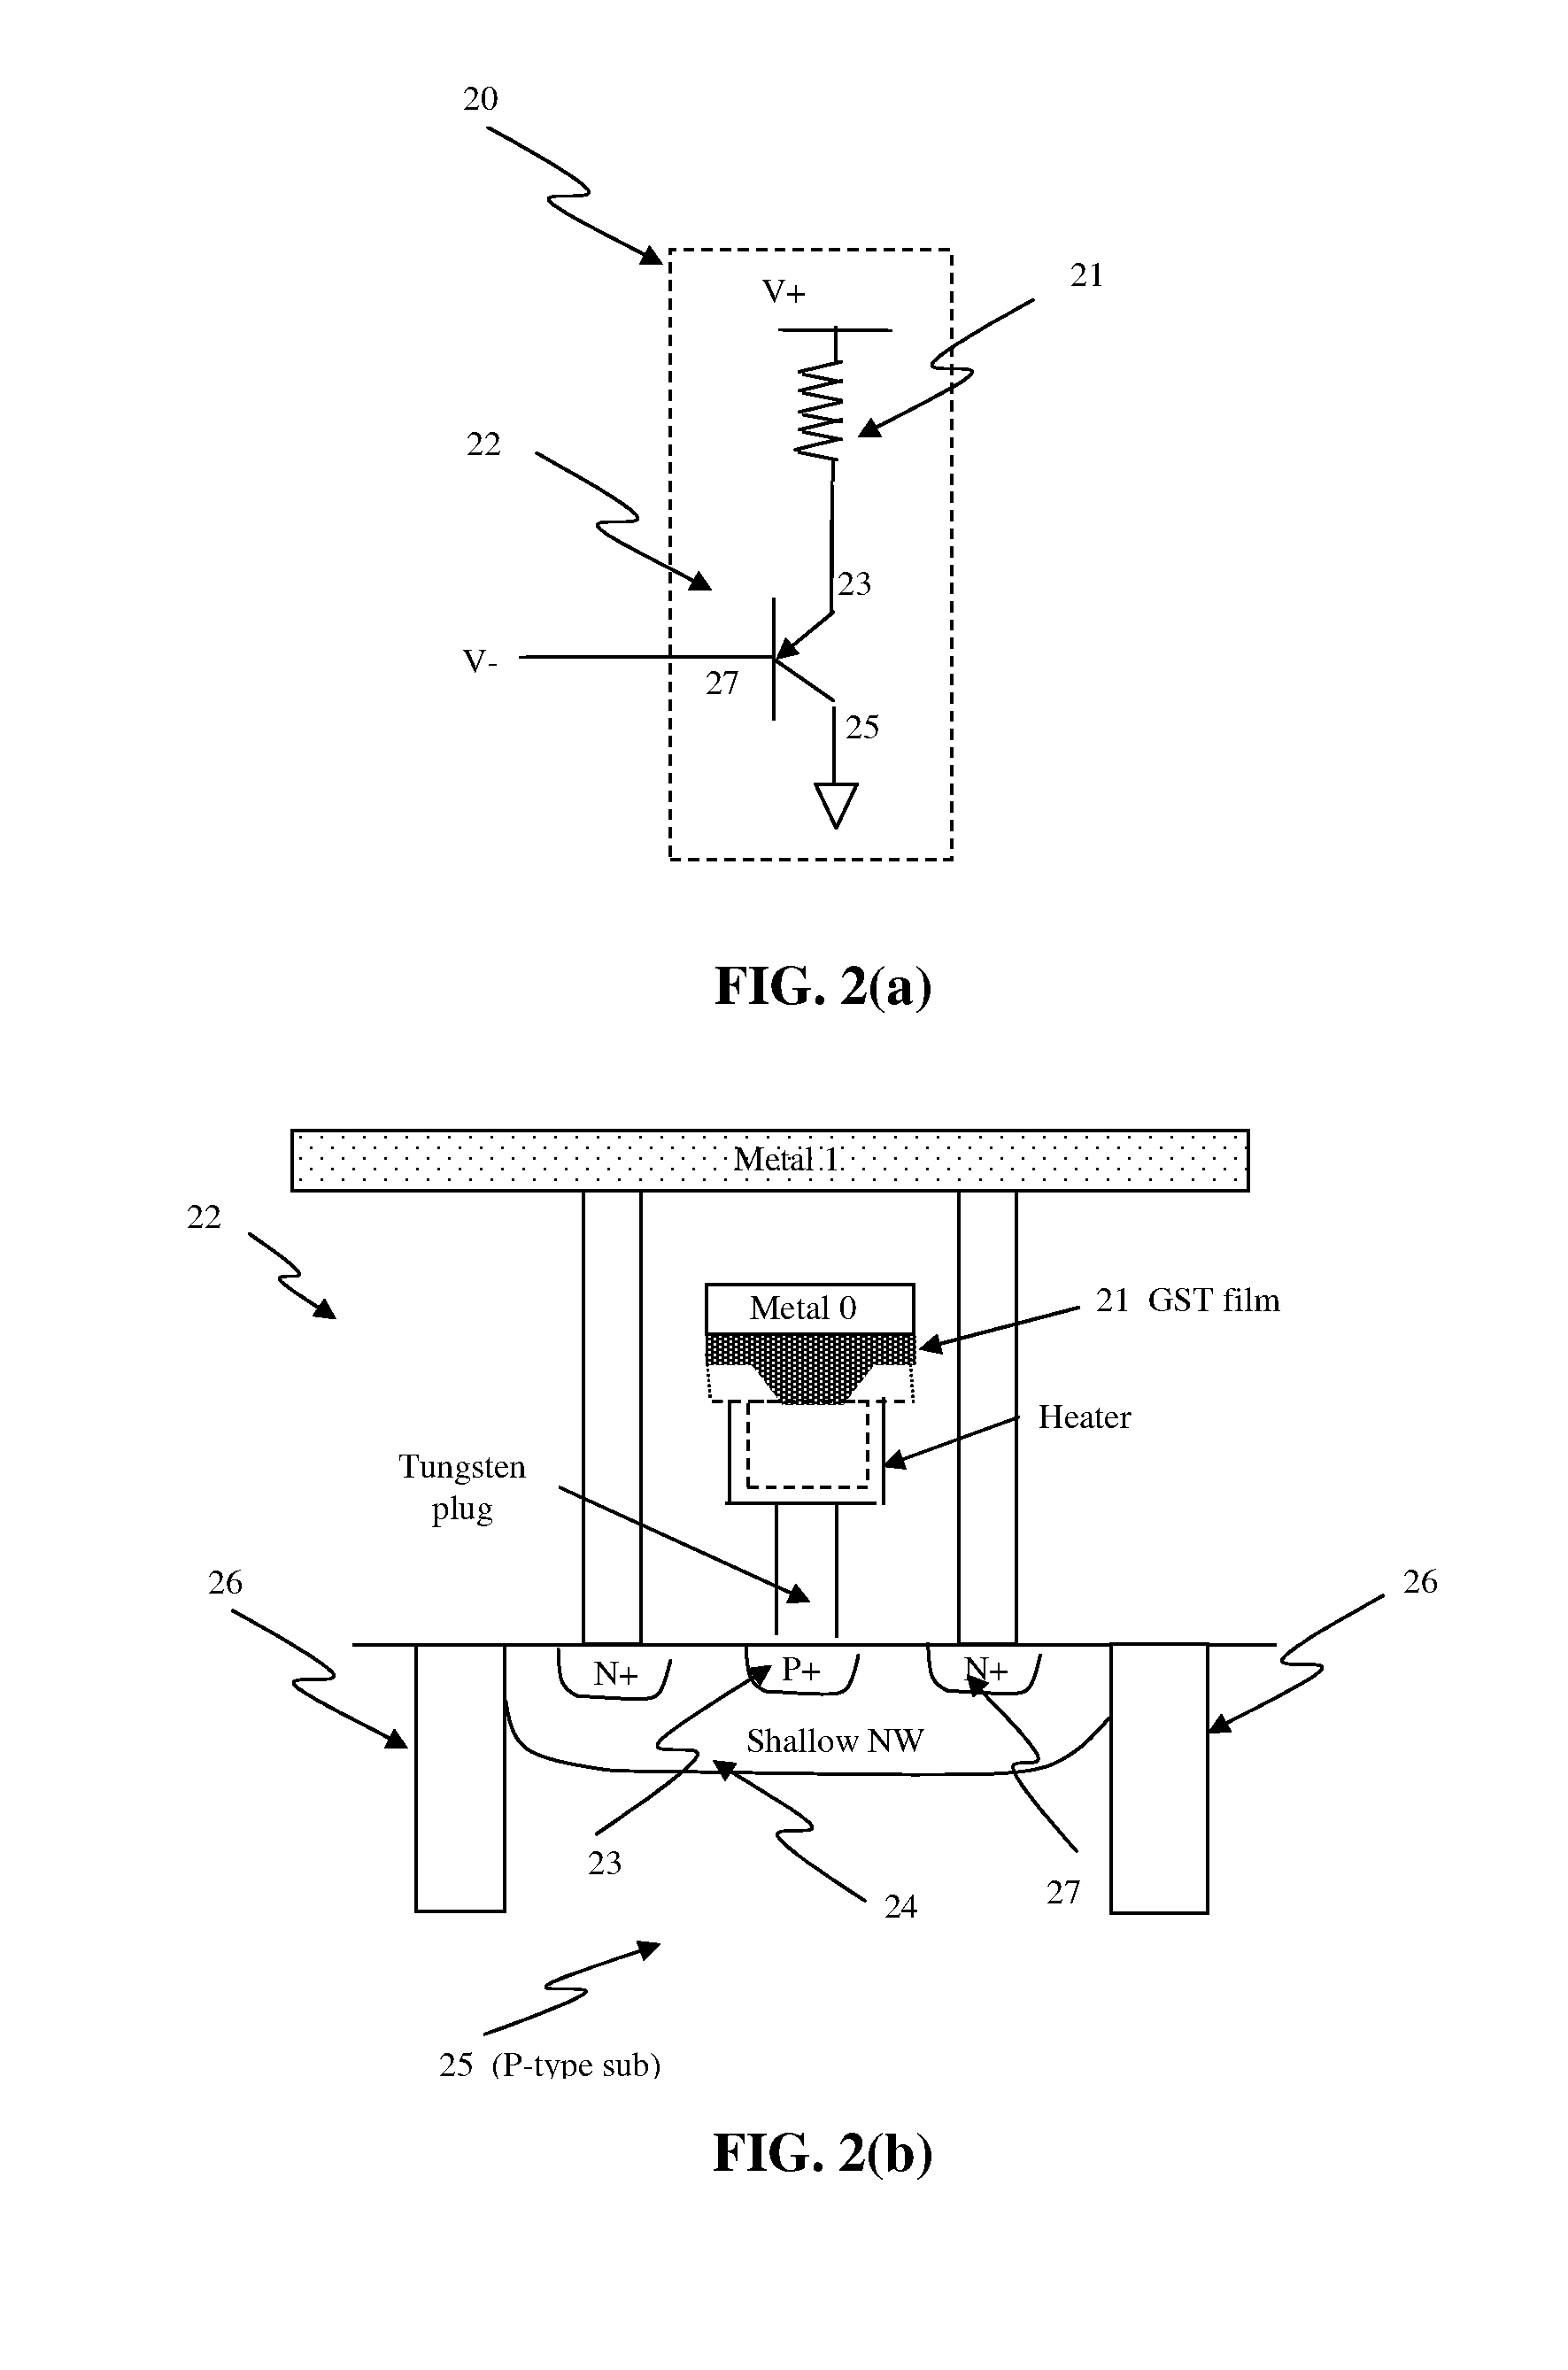 Memory using a plurality of diodes as program selectors with at least one being a polysilicon diode